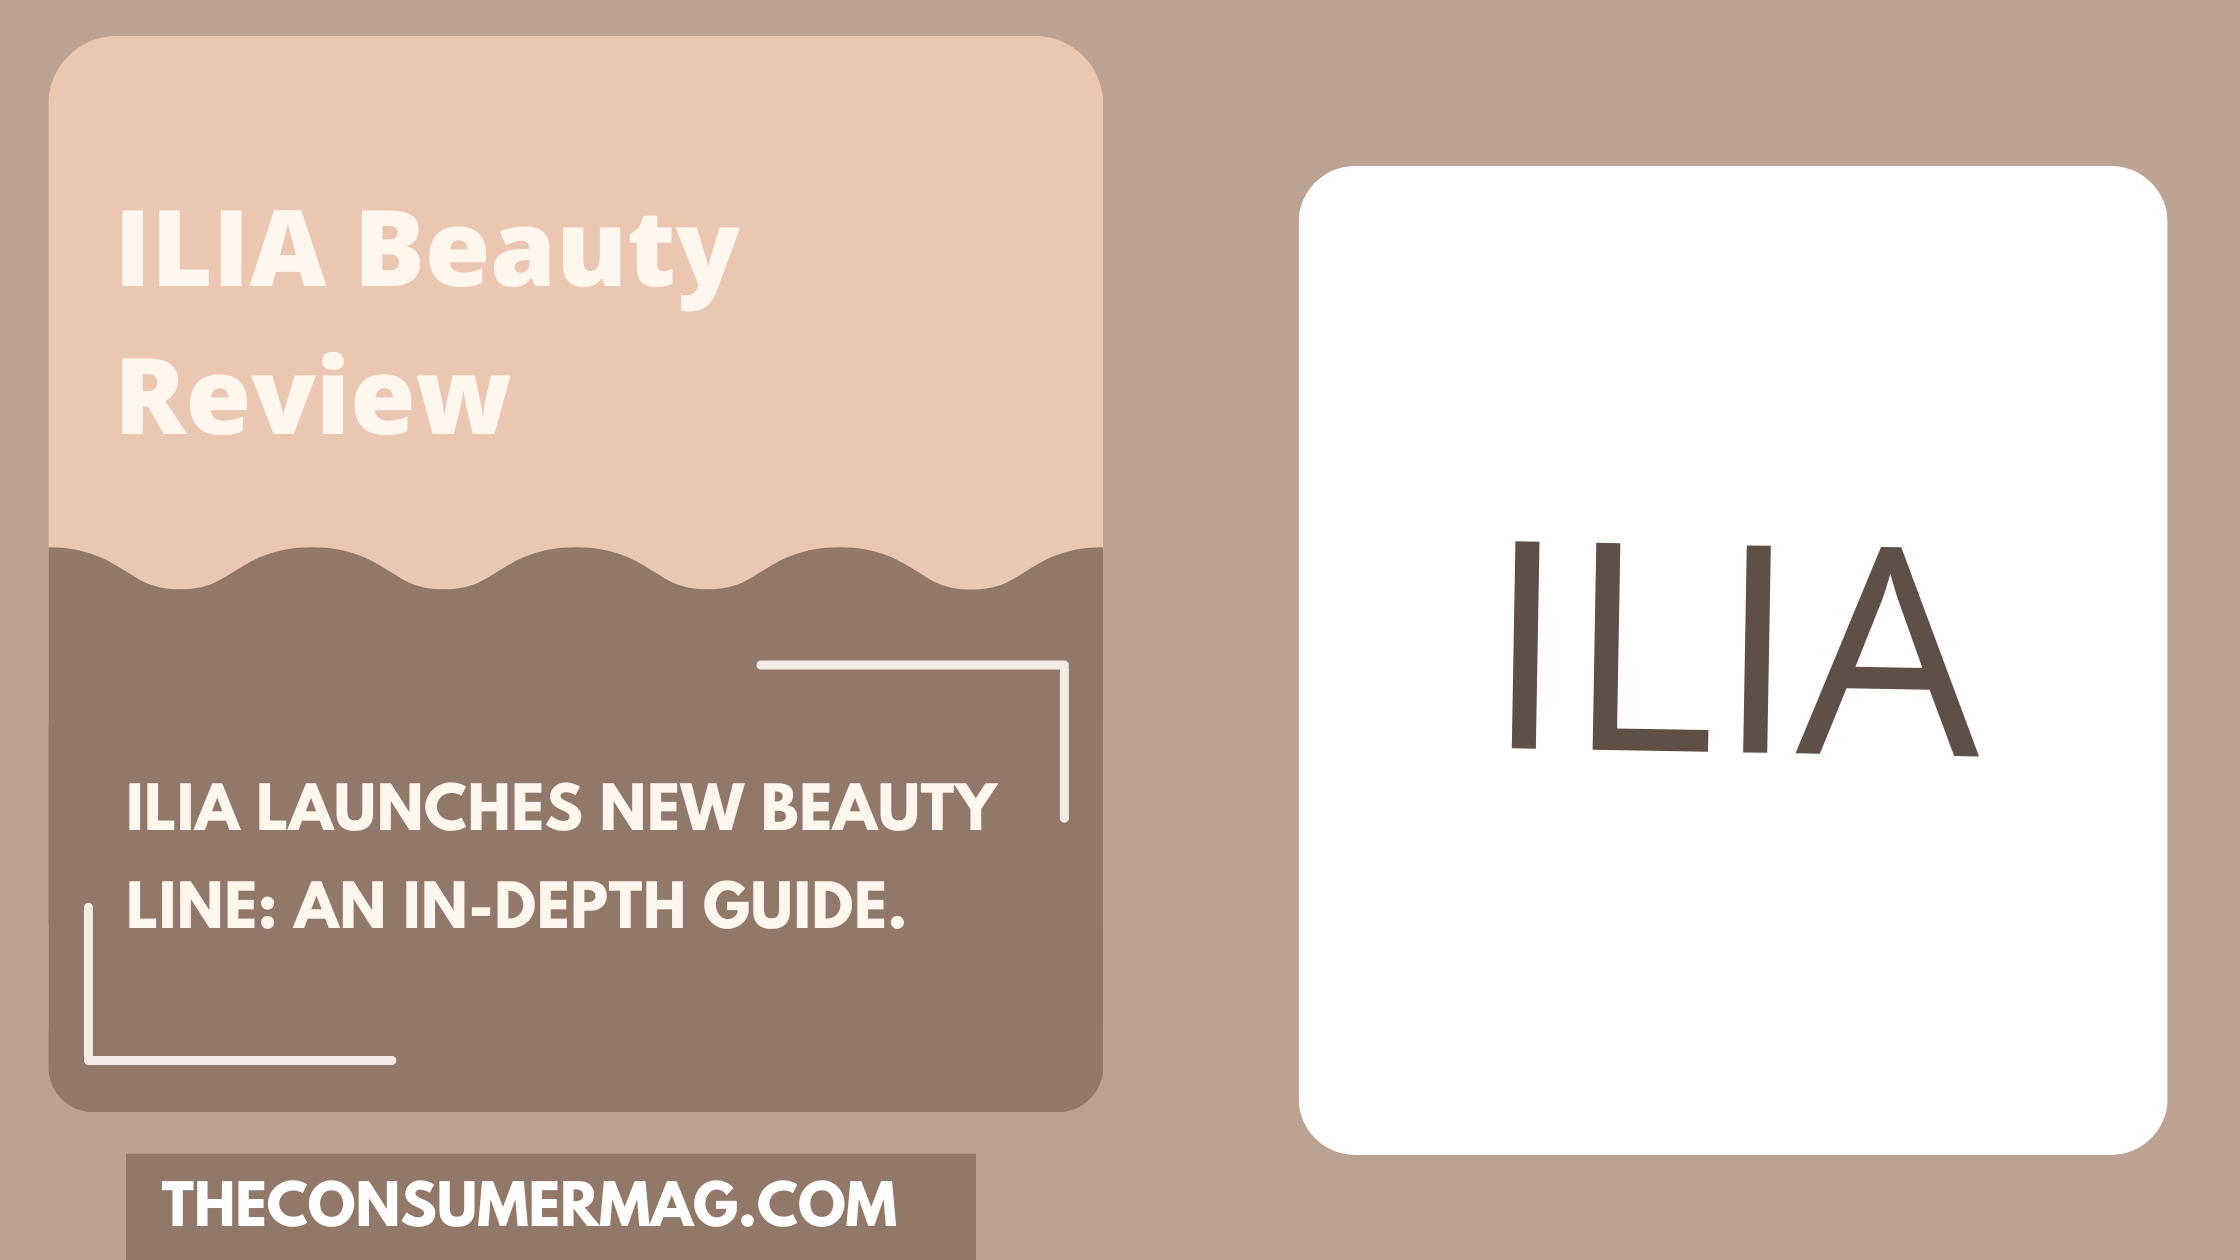 Ilia Beauty Cosmetic featured review